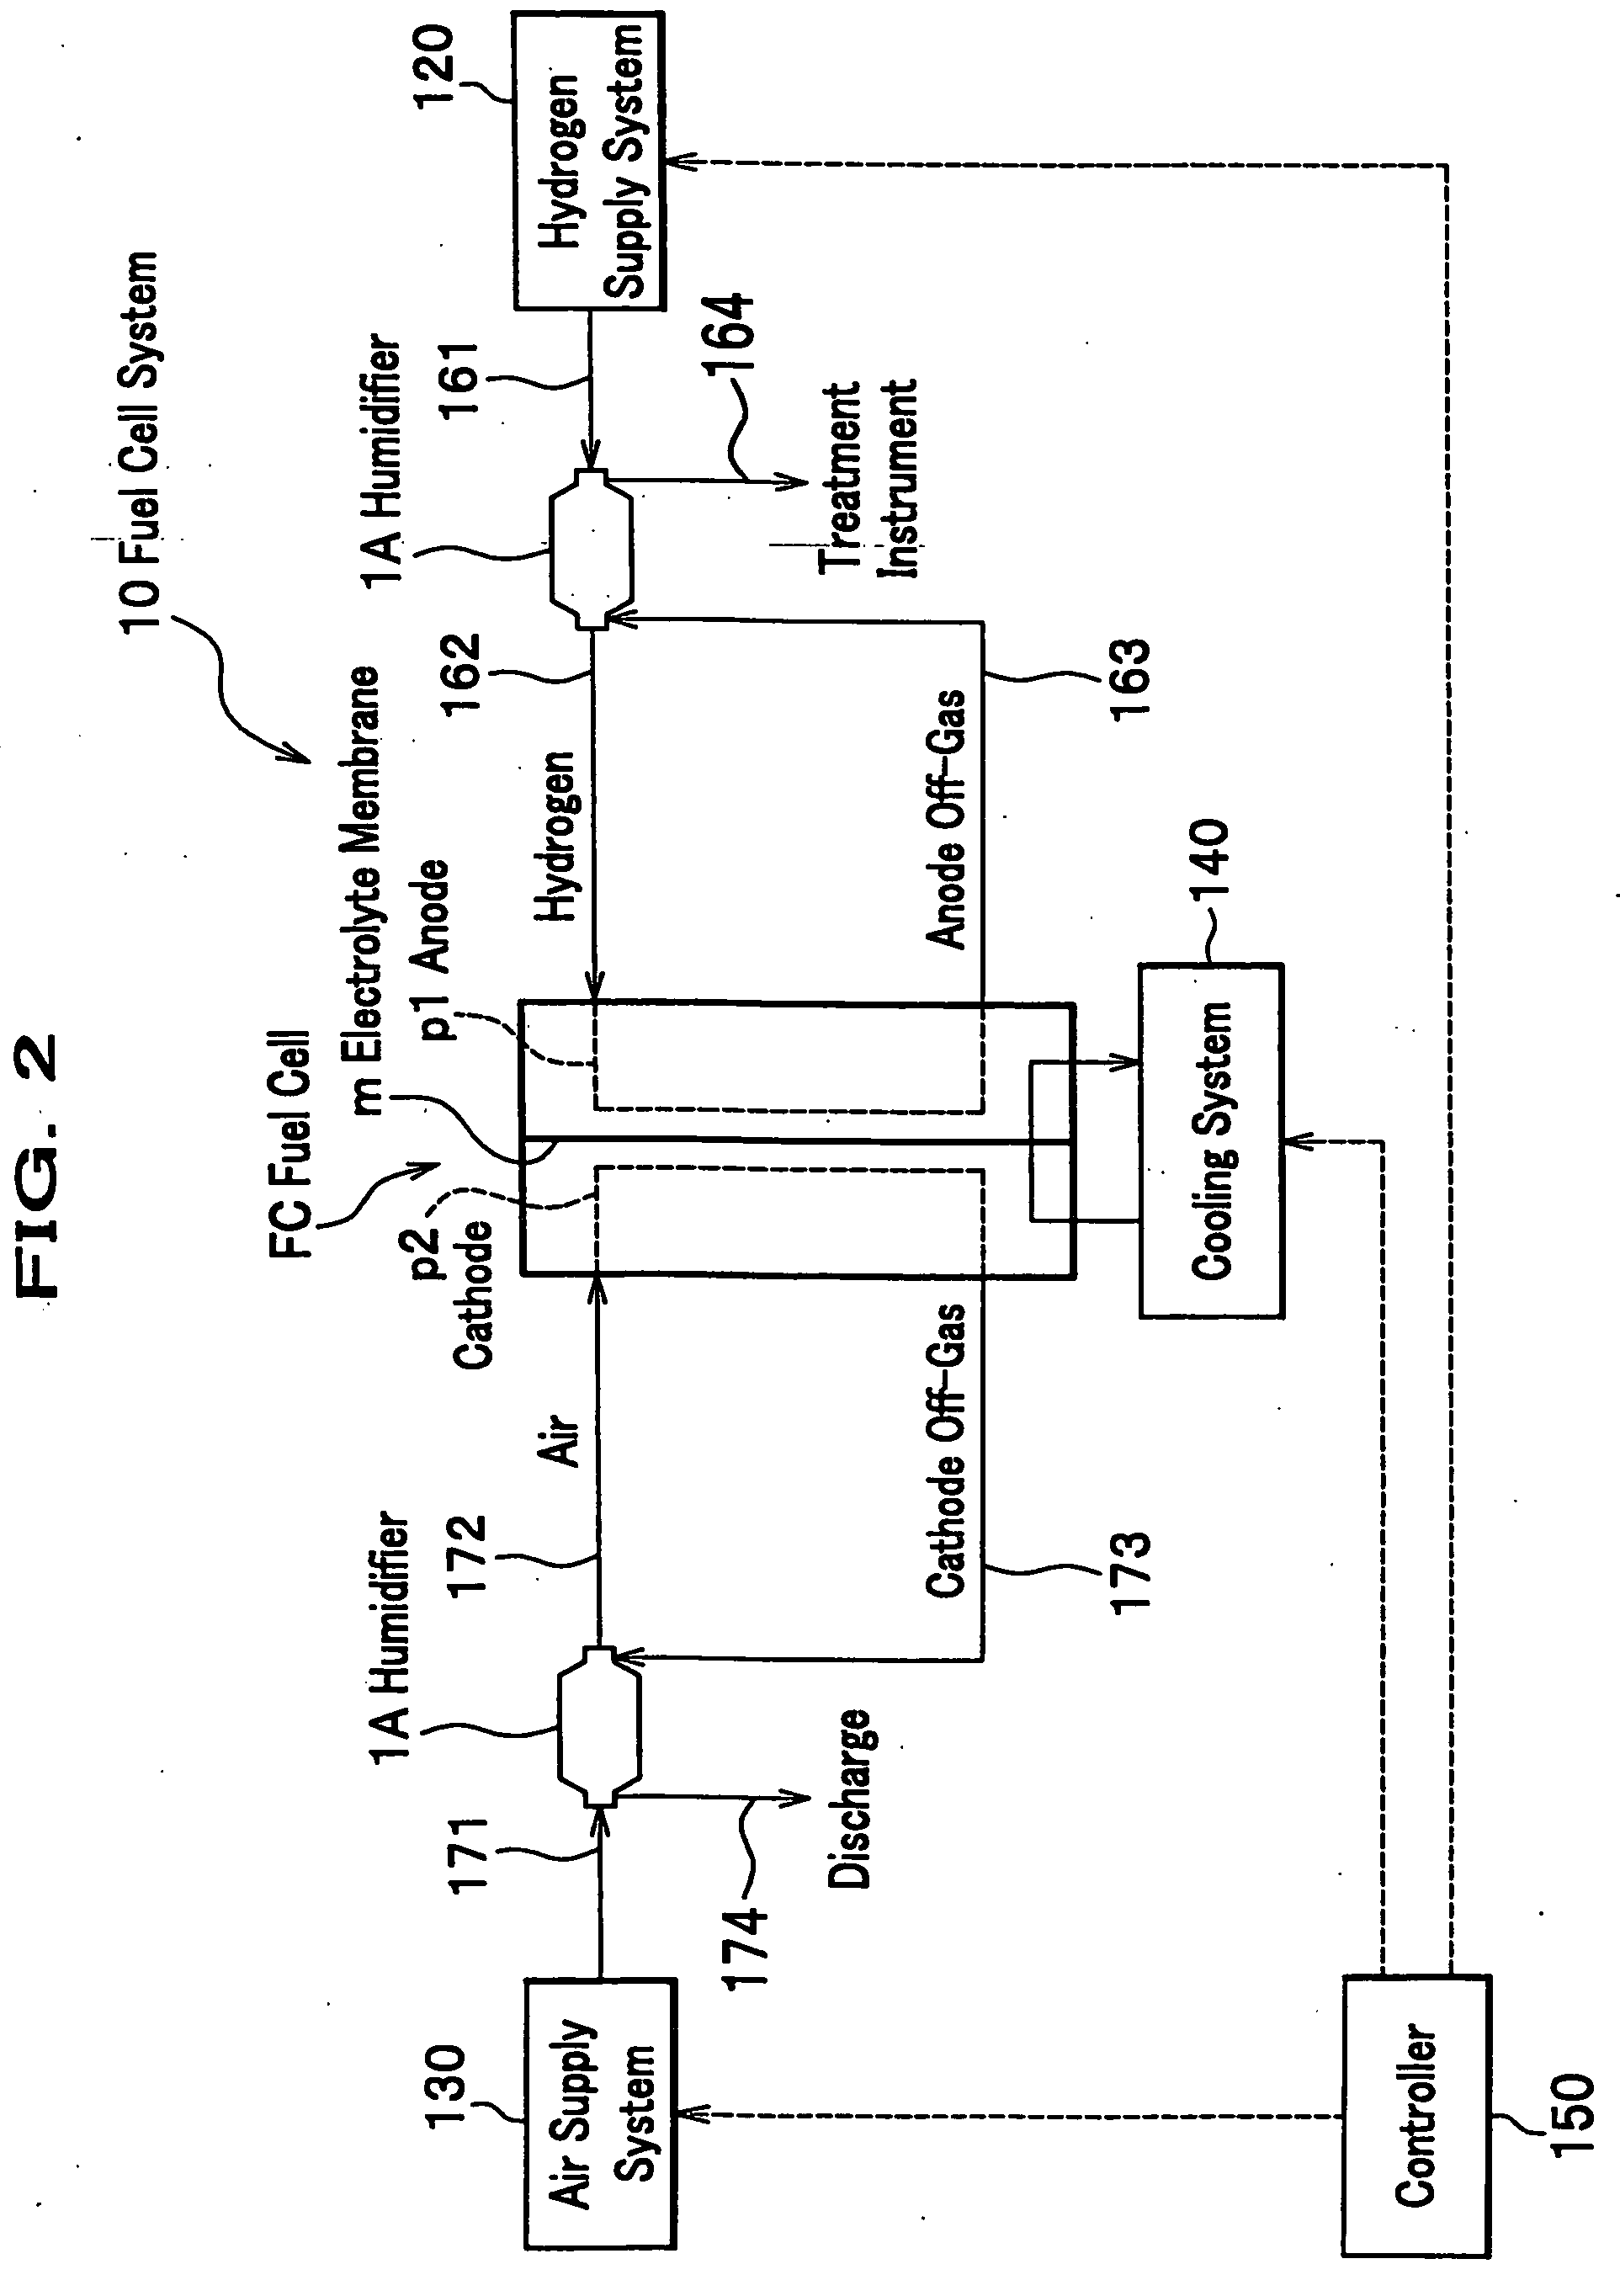 Humidifier for fuel cell system